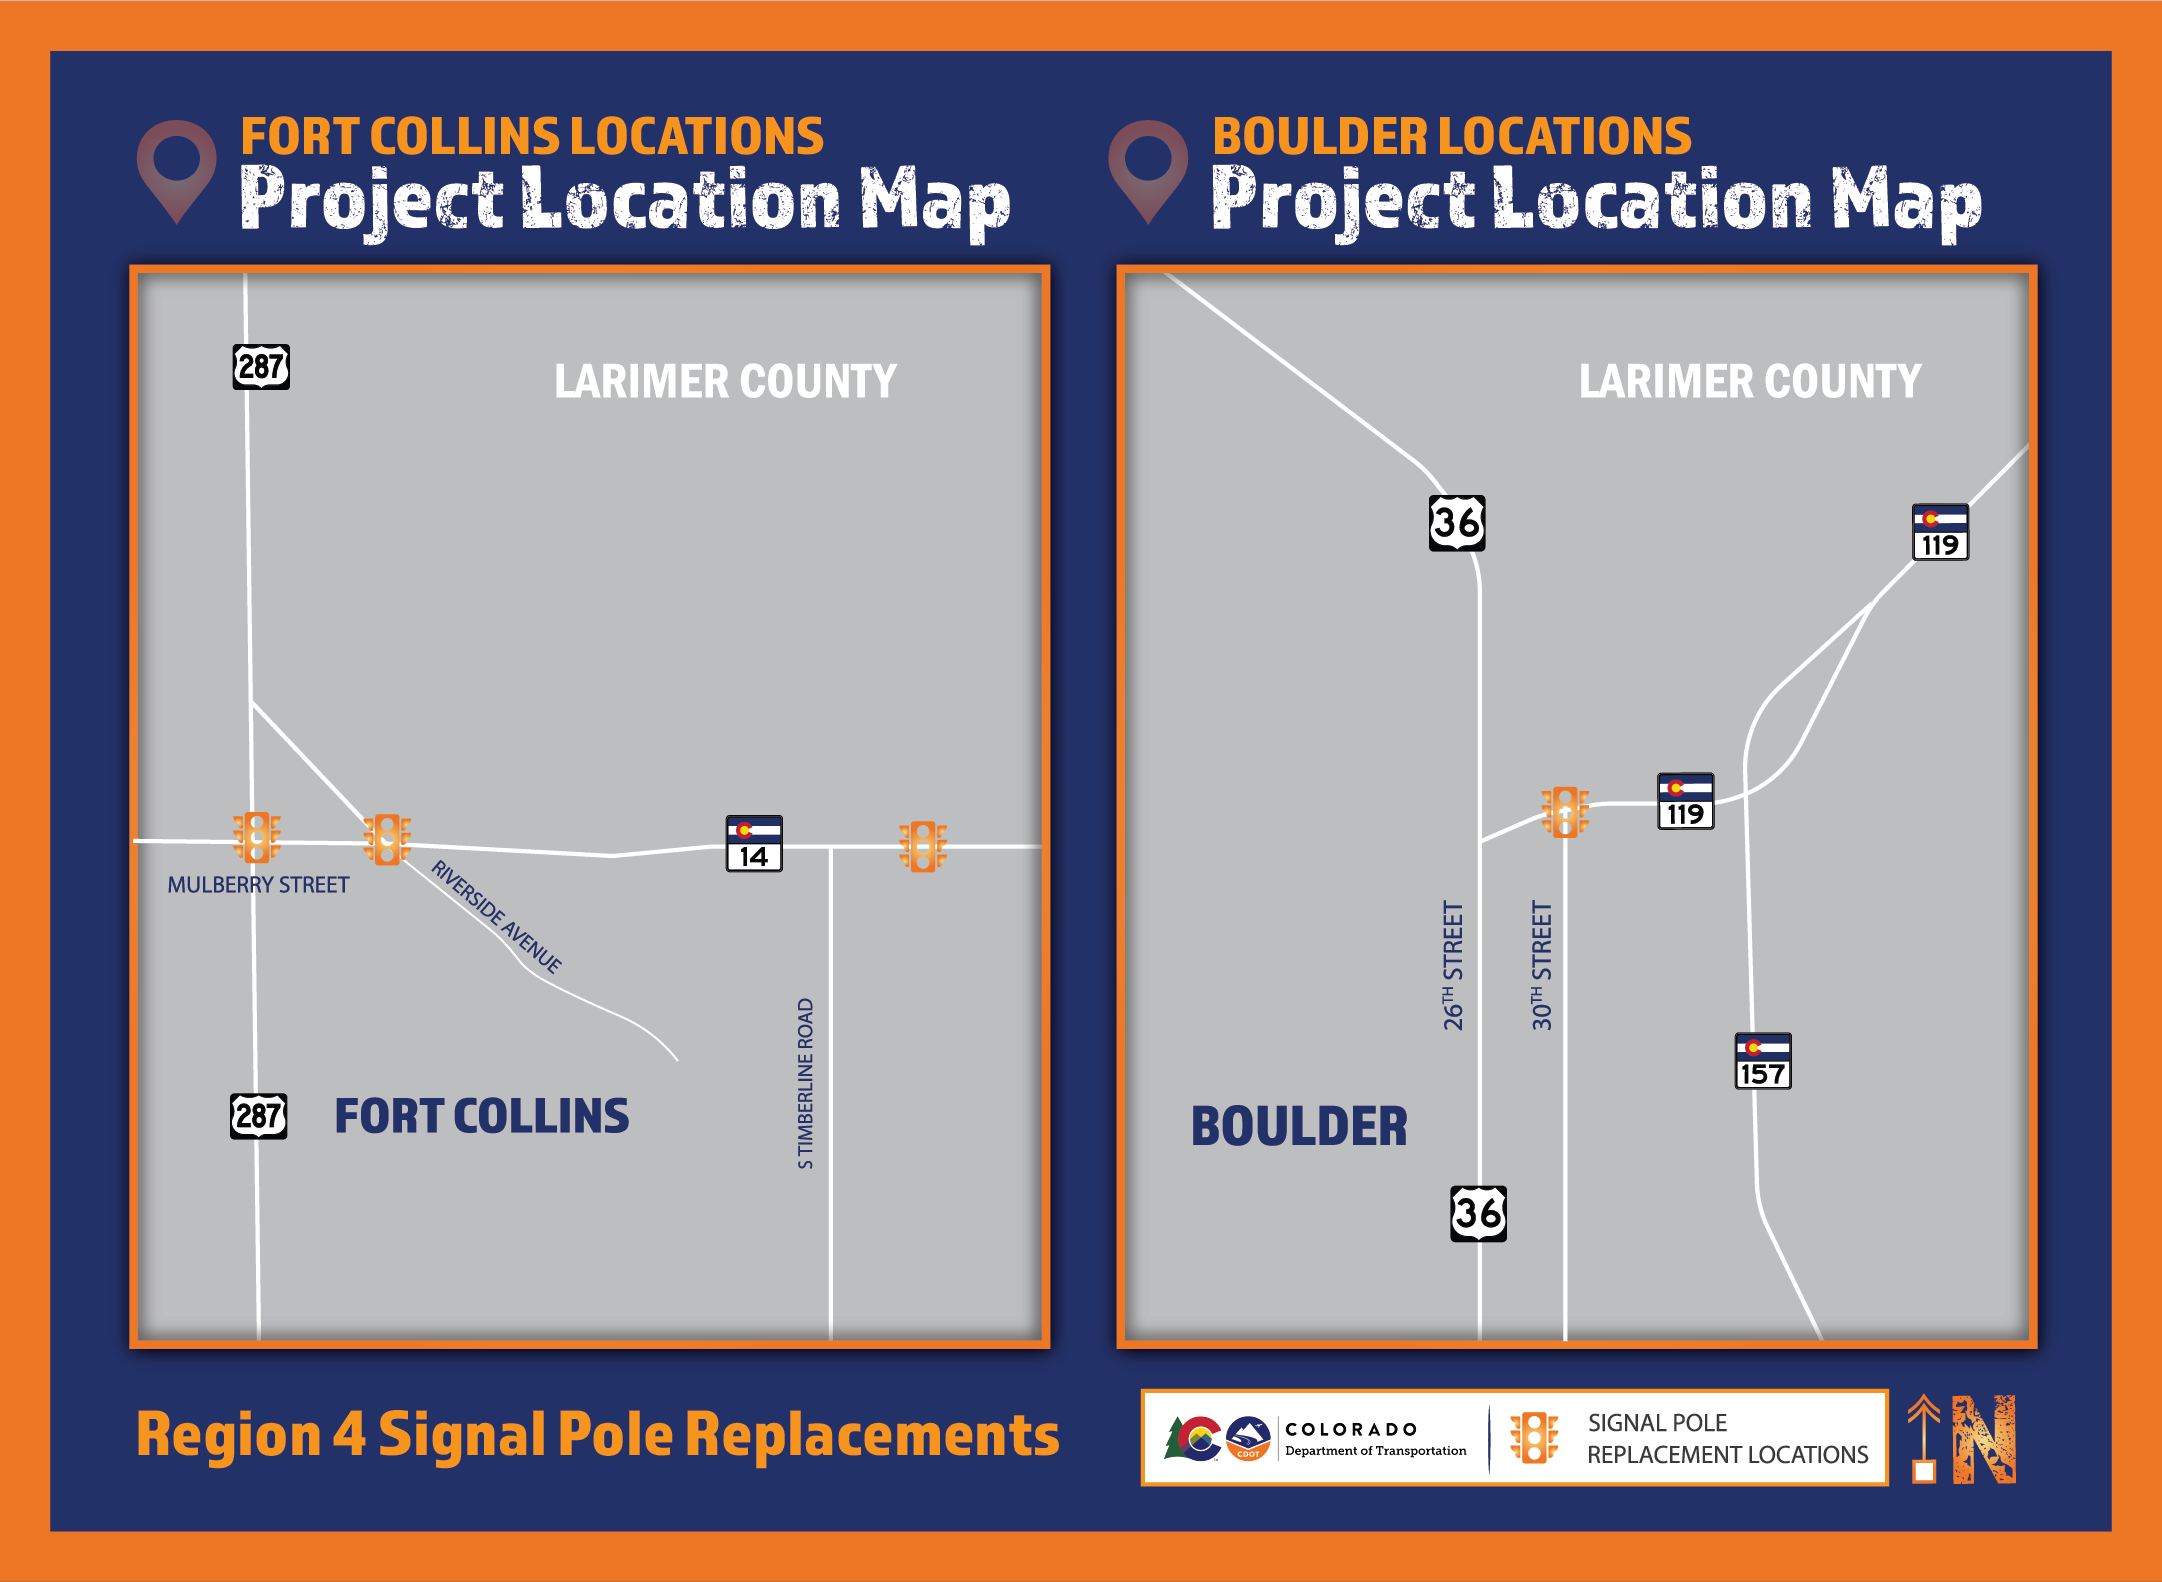 US 287 Signal Pole Replacements Project Location Map v1 6.15.2021-01.png detail image